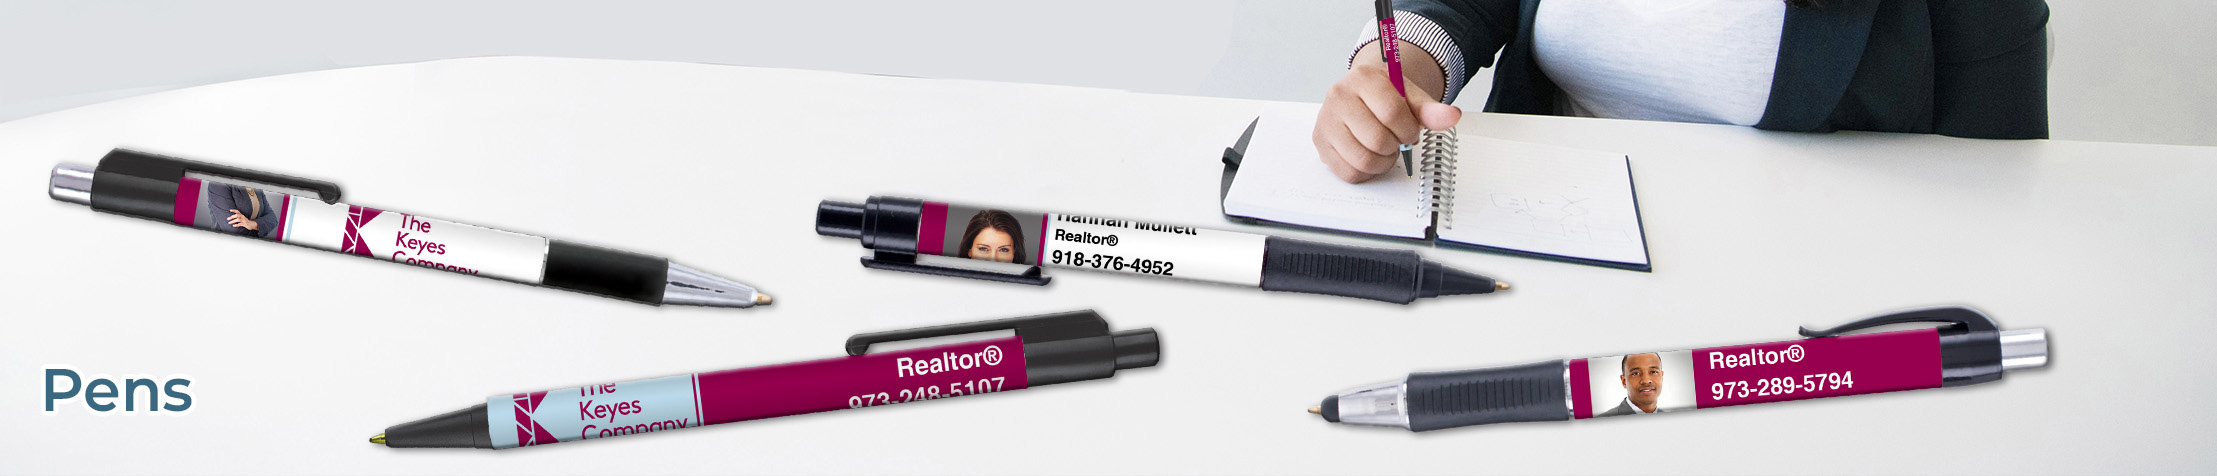 The Keyes Company Real Estate Pens - The Keyes Company  personalized realtor promotional products | BestPrintBuy.com